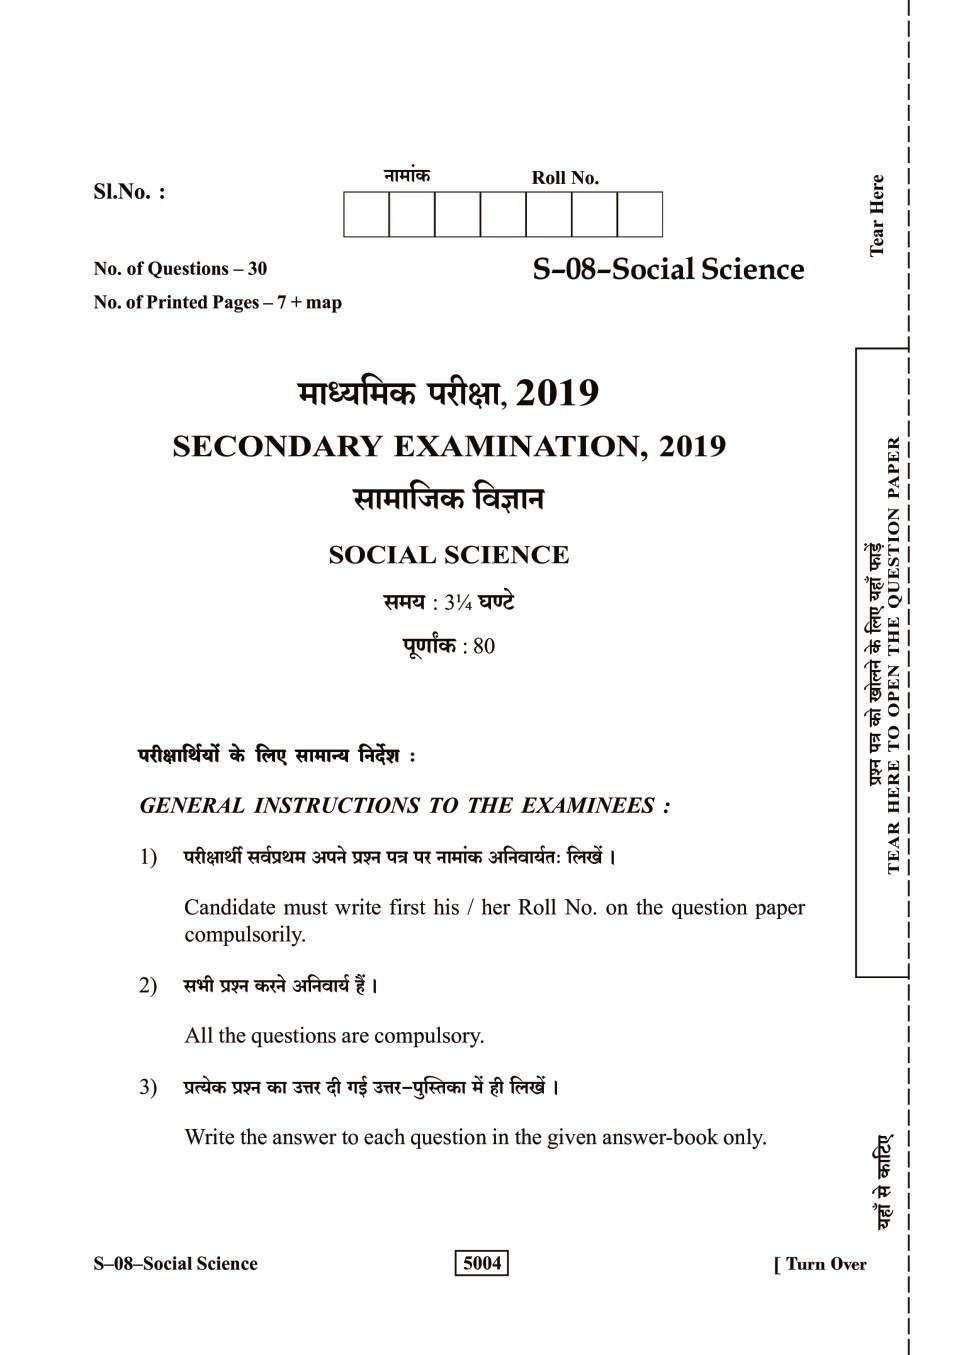 Rajasthan Board 10th Class Social Science Question Paper 2019 - Page 1